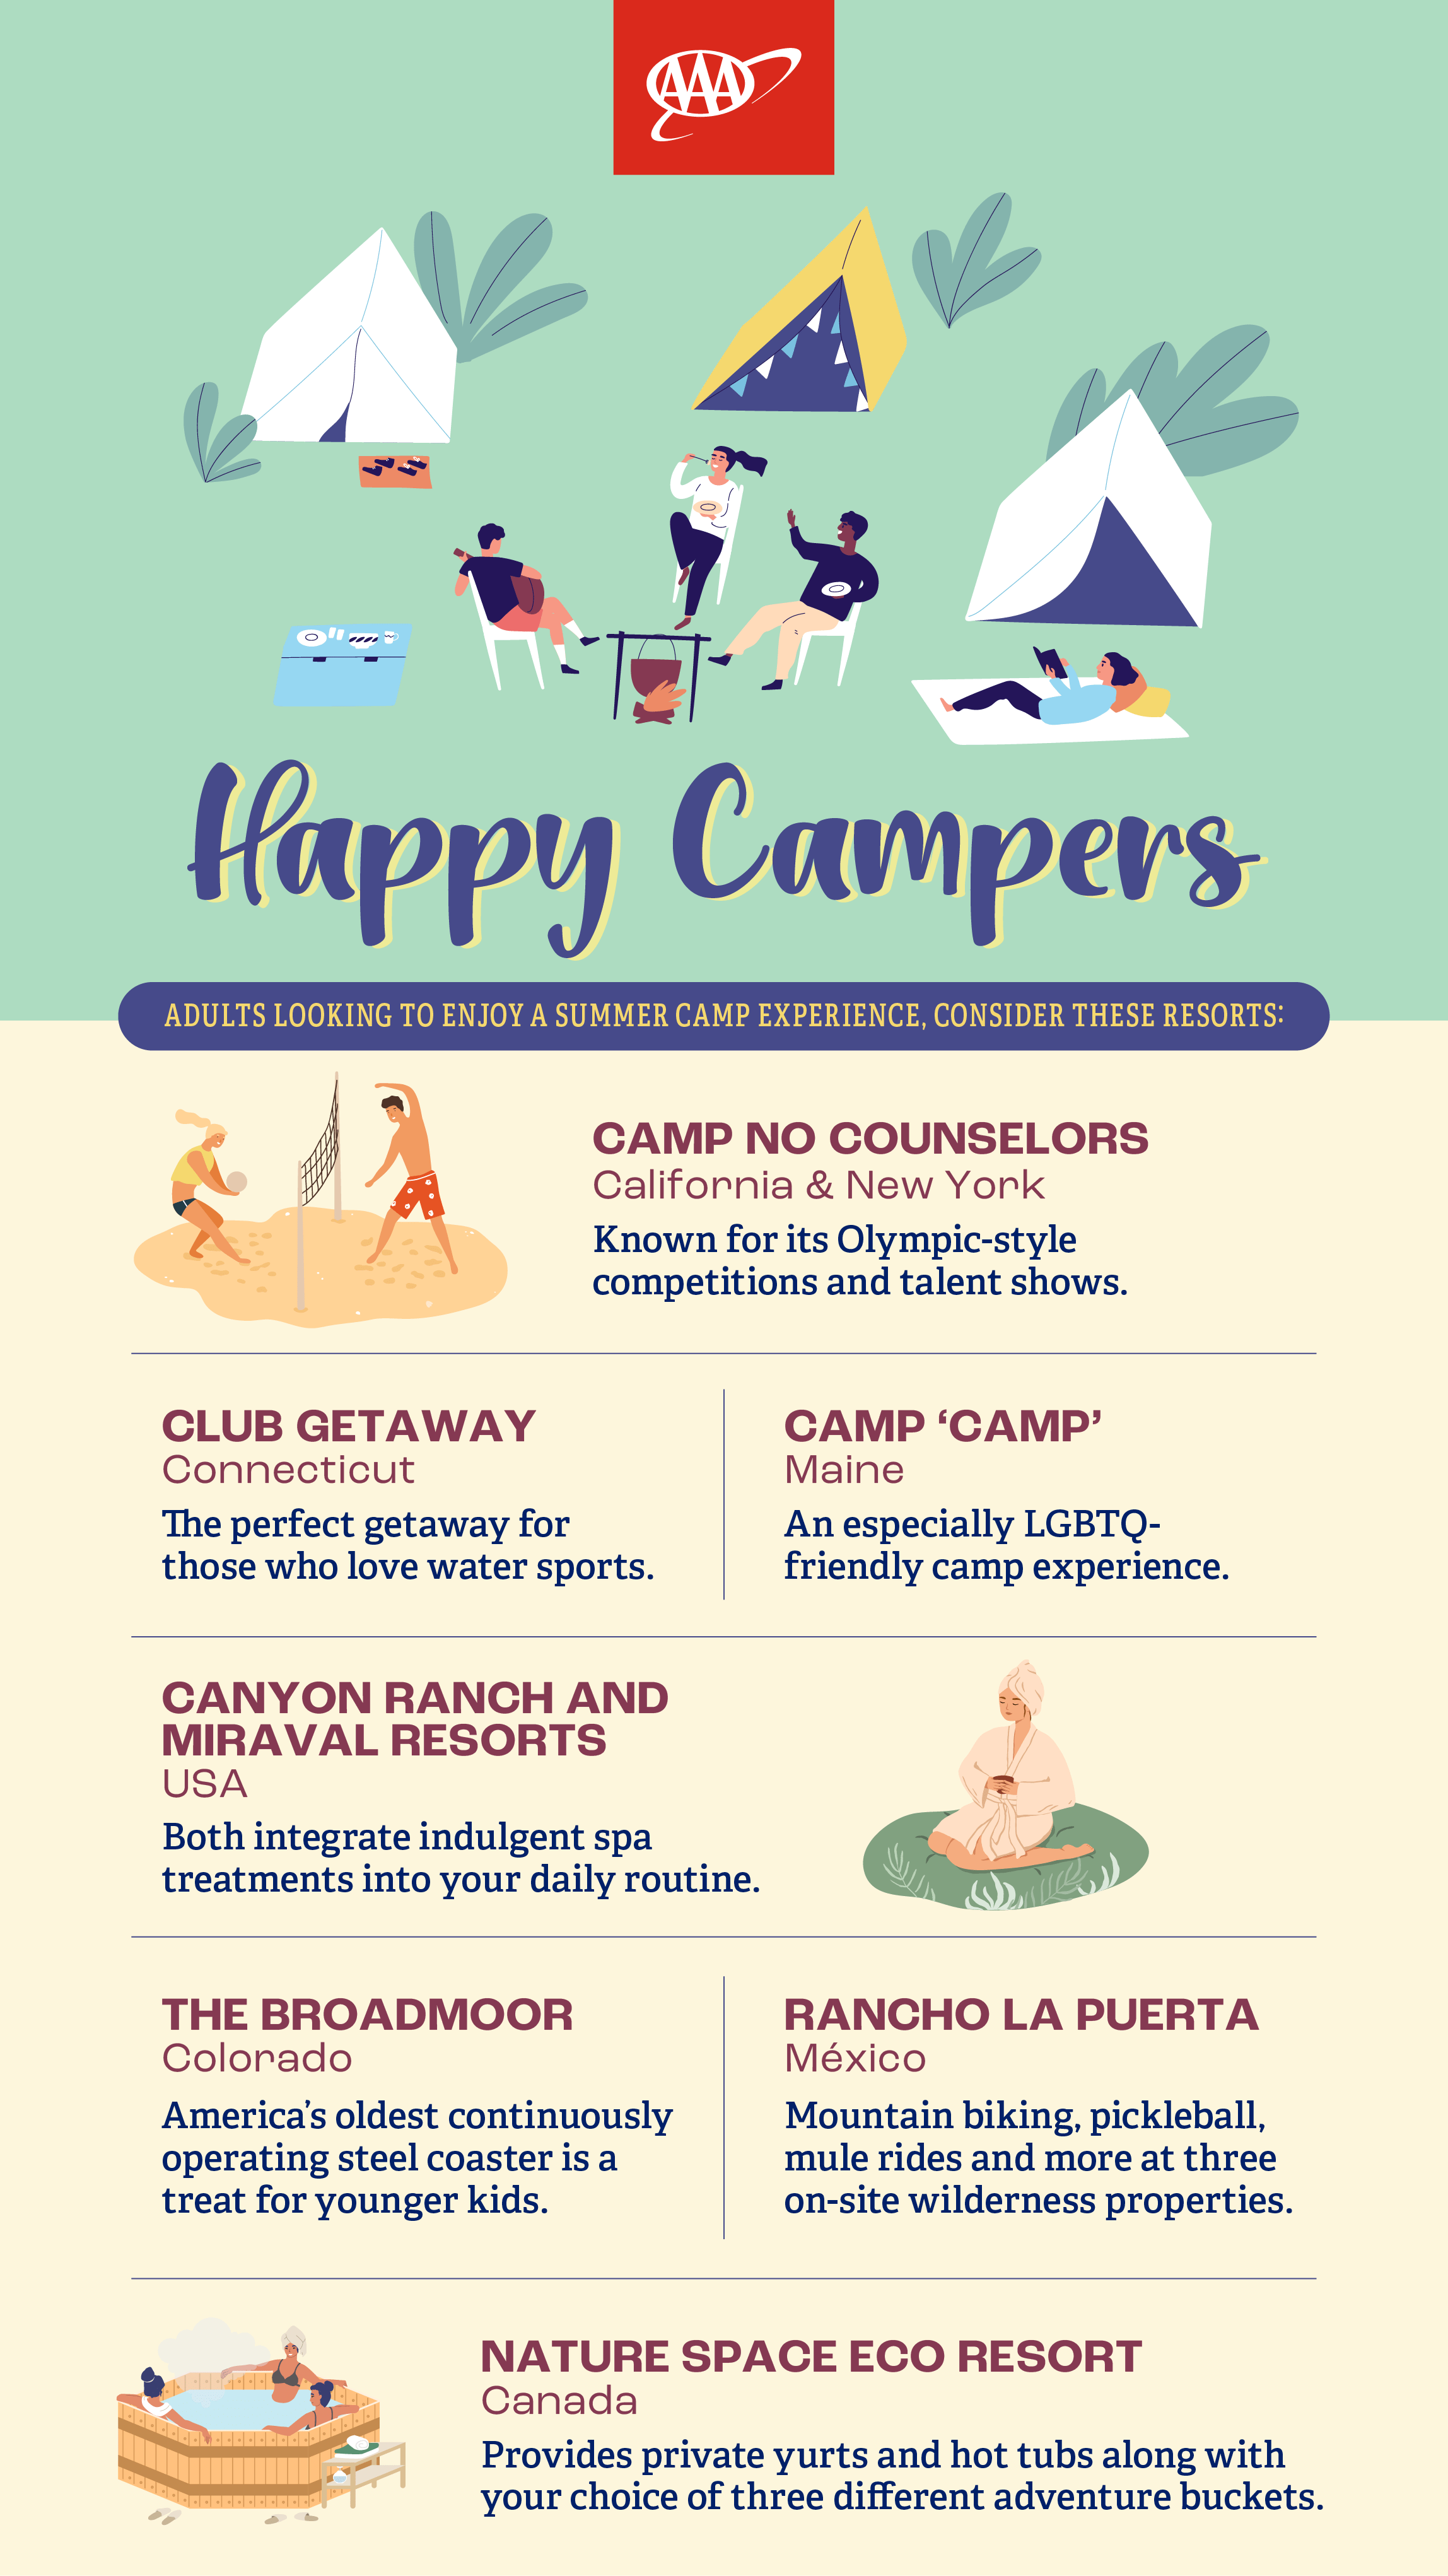 AAA infographic on summer camps for adults